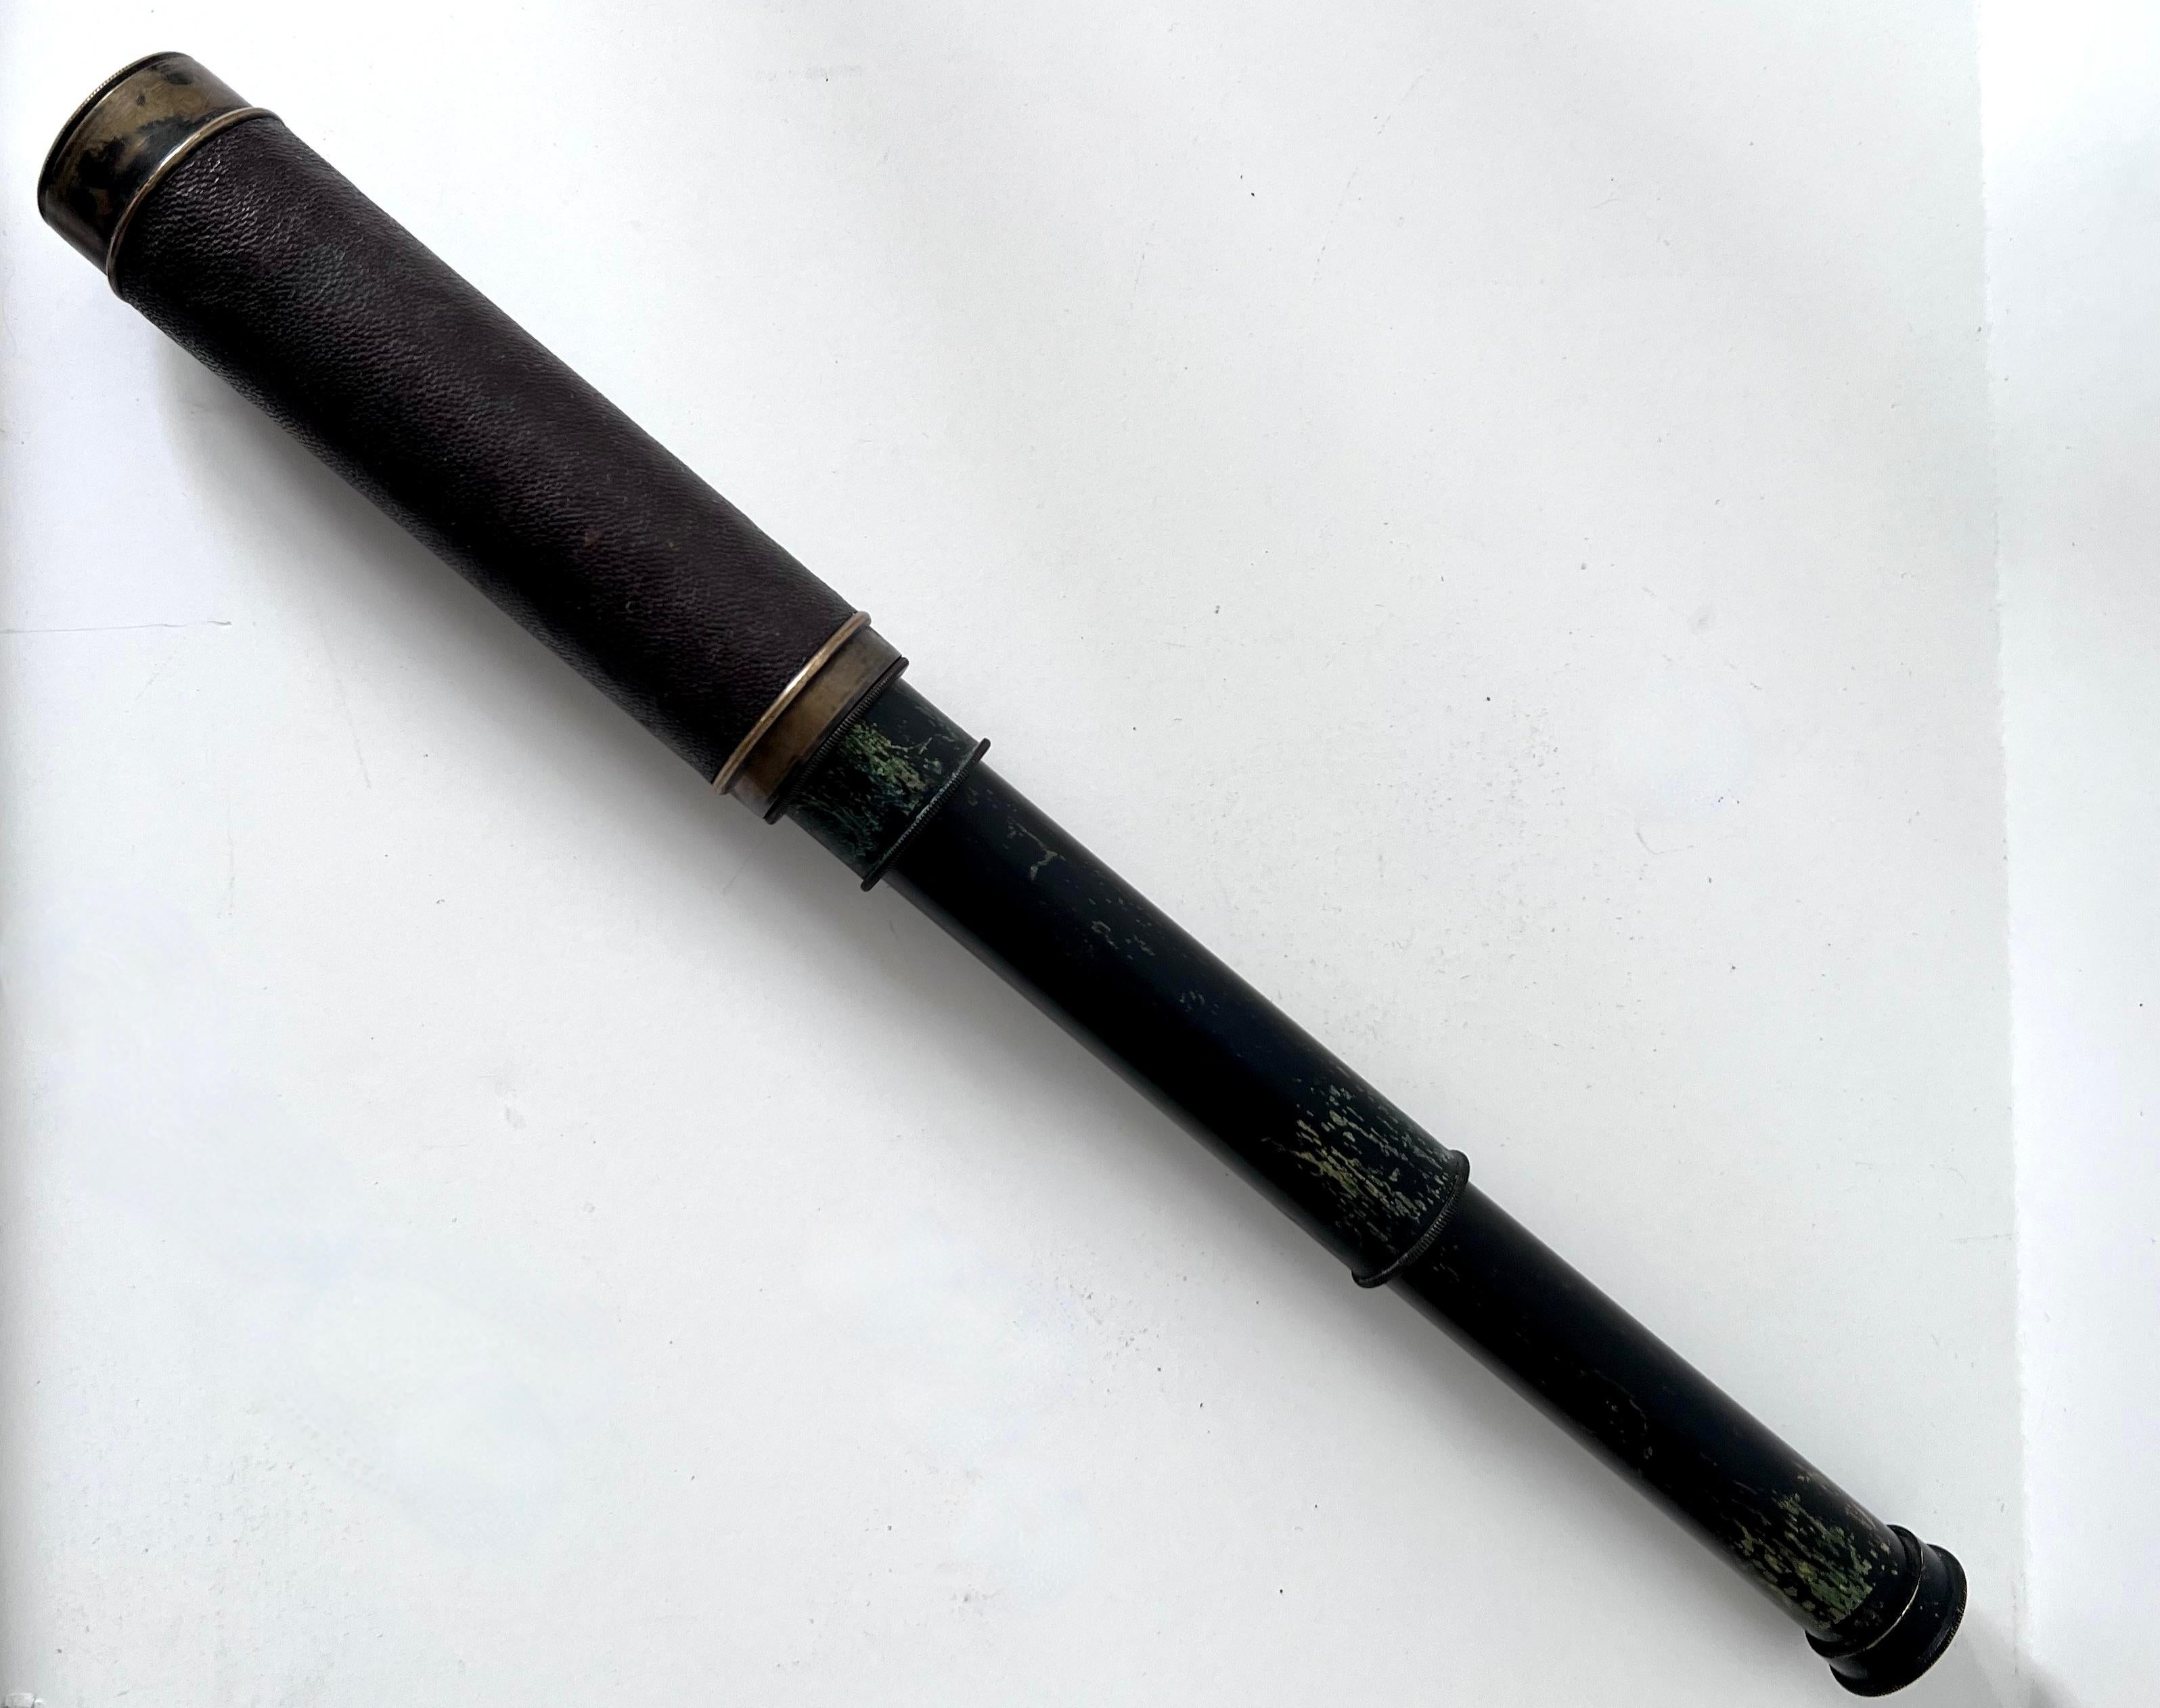 Acquired in Paris, France. A wonderful early 20th Century spyglass or telescope. Expandable from 6